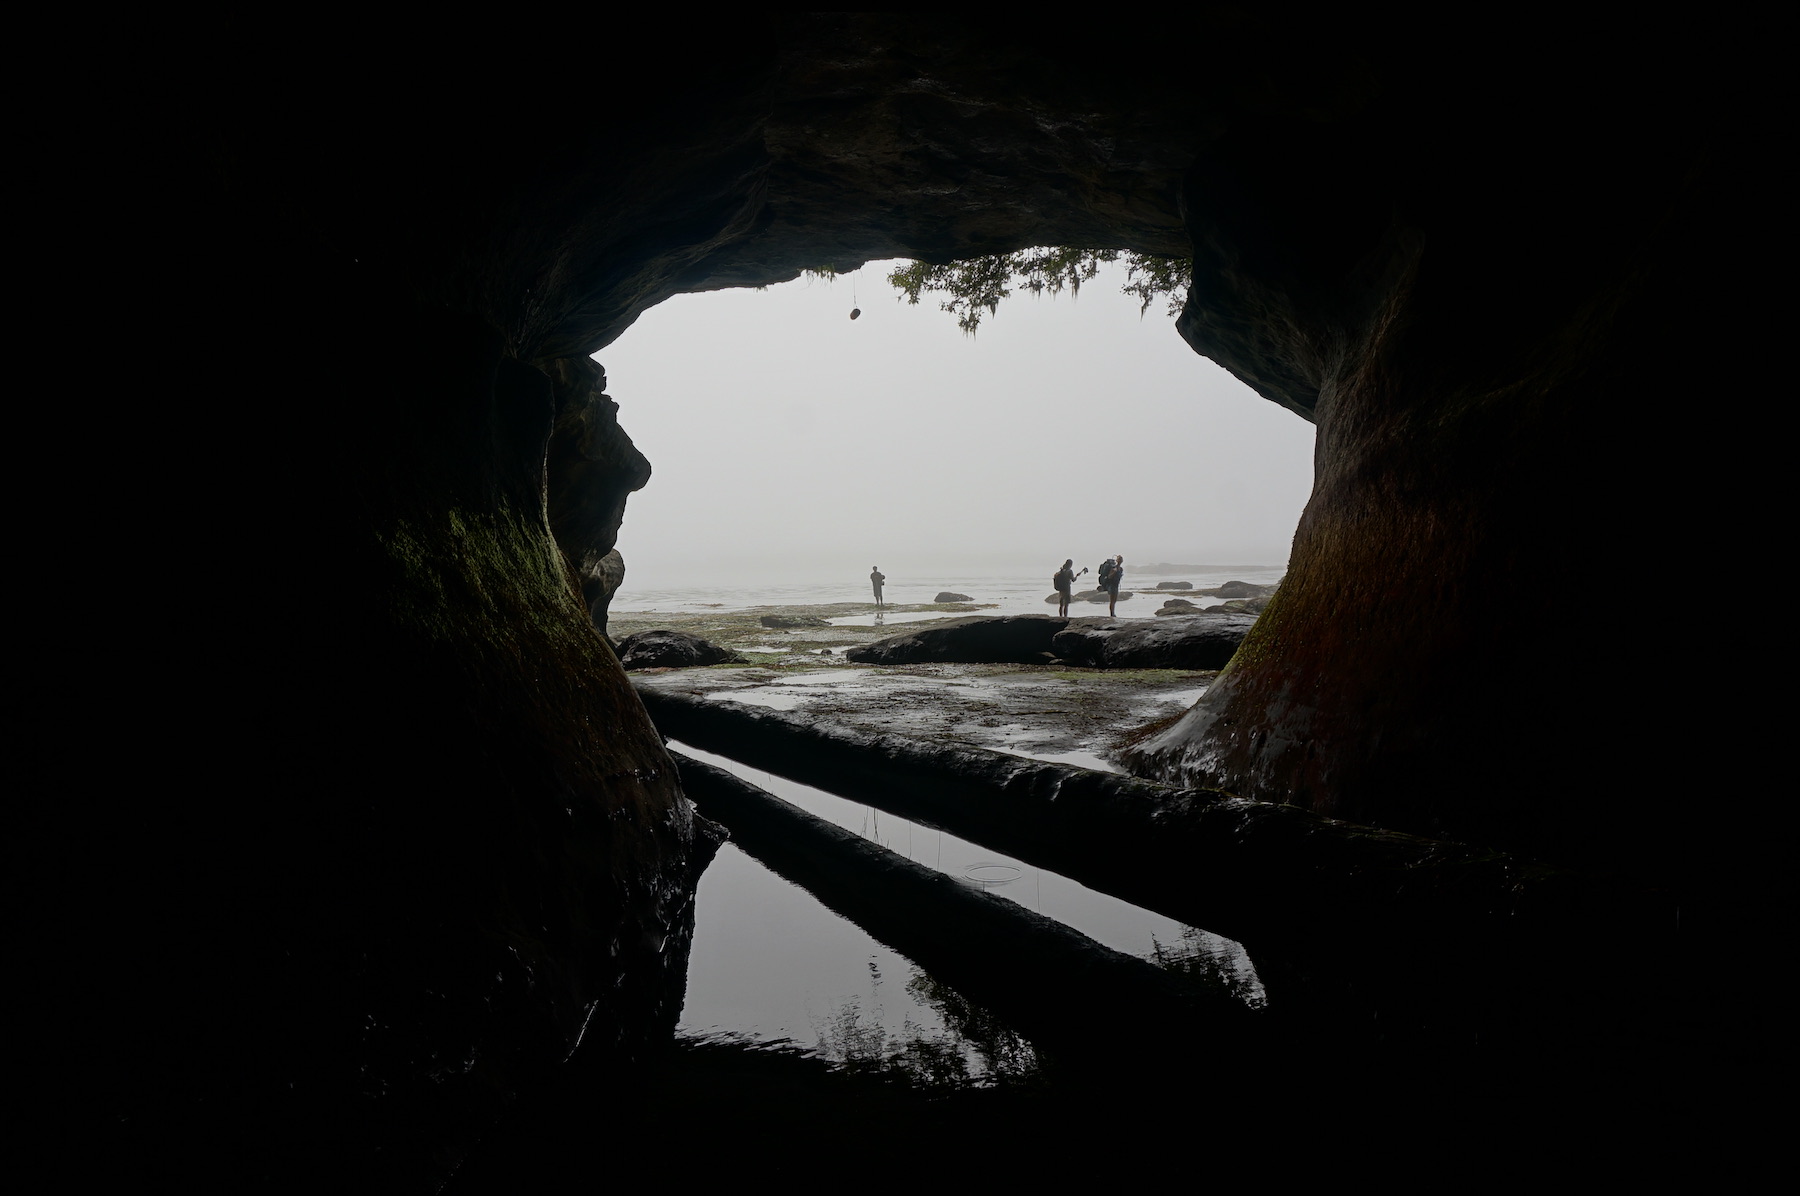 looking out of a cave, three people silhouettes